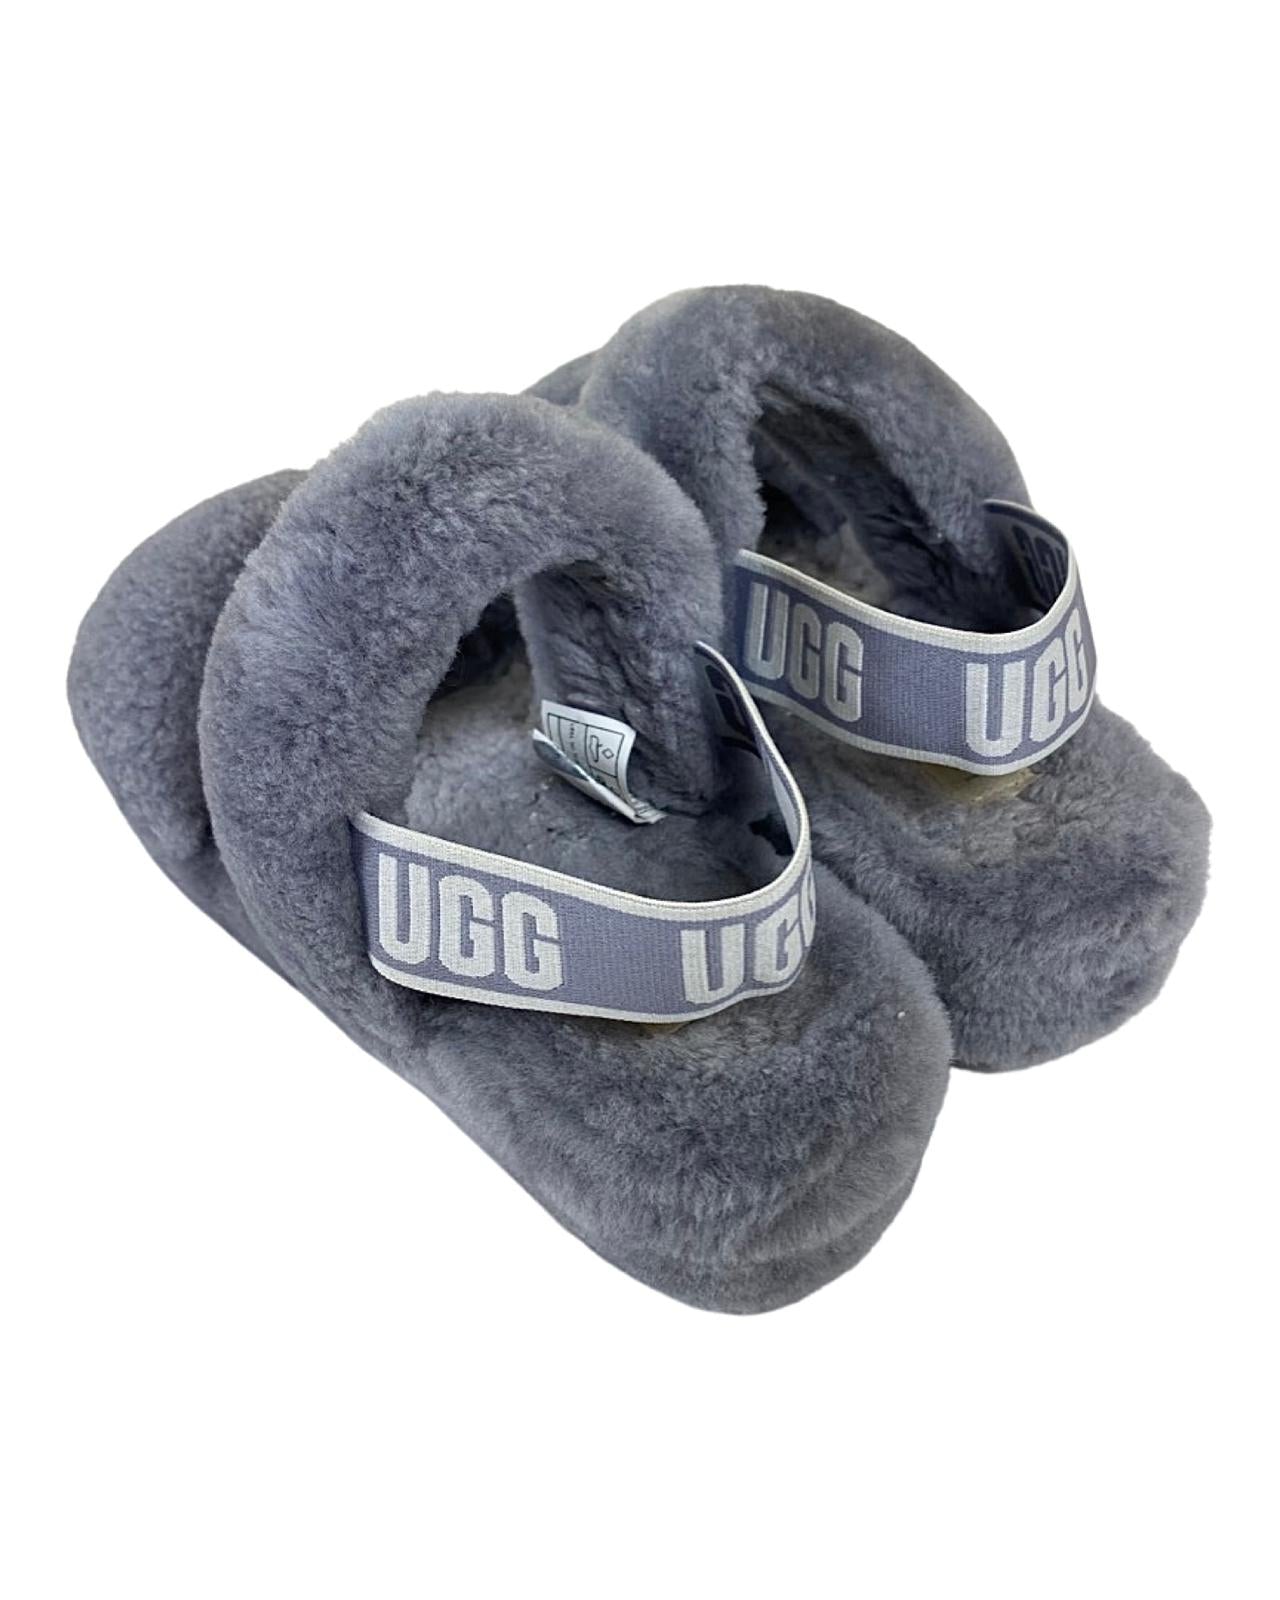 Ugg Oh Yeah Fluffy Double Strap Flat Sandals in Grey UK 5 | EU 38-The Freperie